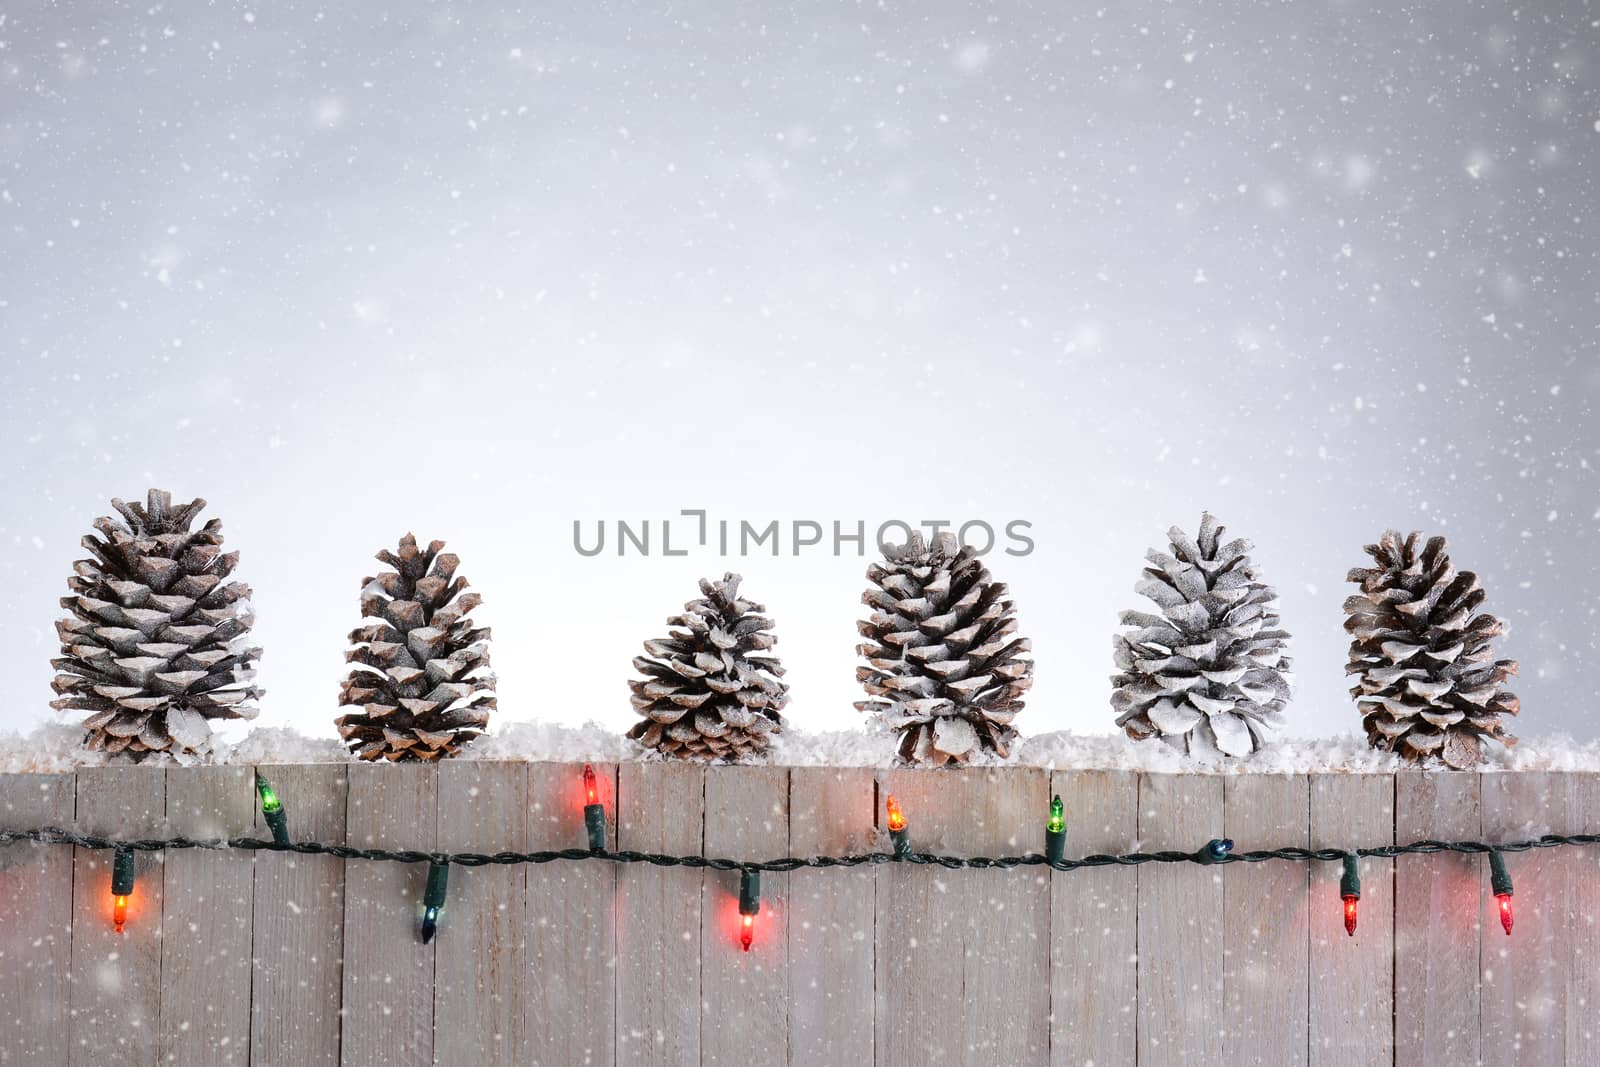 A rustic wood fence with pine cones lined up on top. Christmas lights and snow flakes round out the holiday scene. 